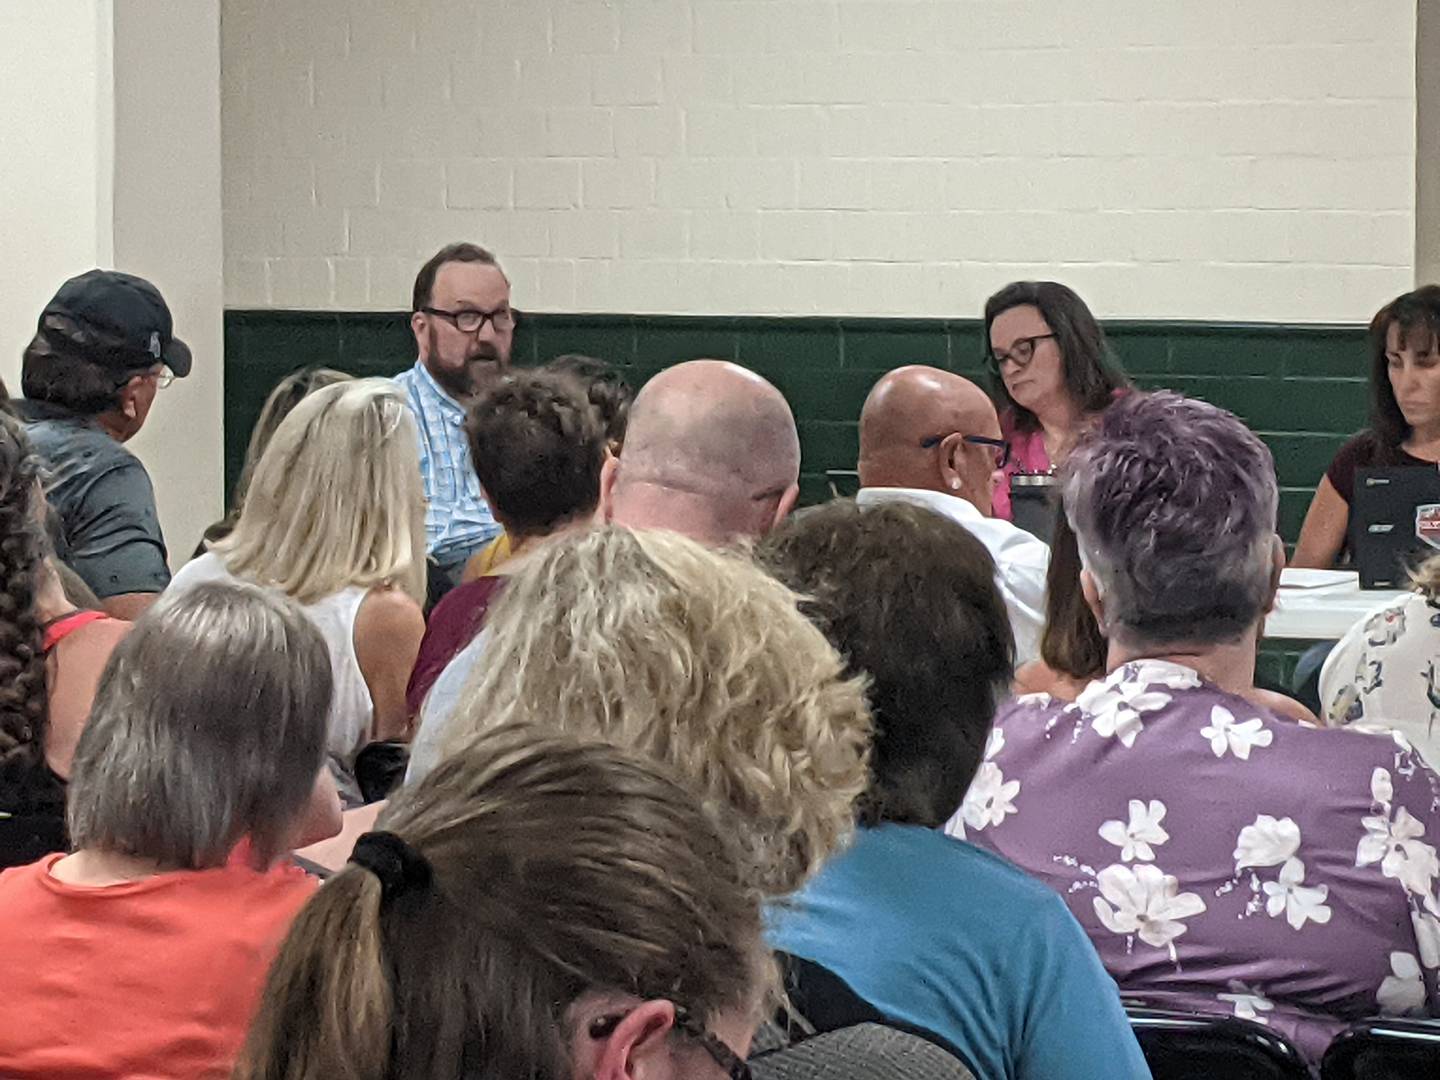 Dixon Public Library Director Antony Deter speaks to a large crowd Monday, July 11, 2022, following concerns from some residents on explicit material in an LGBTQ comic book.